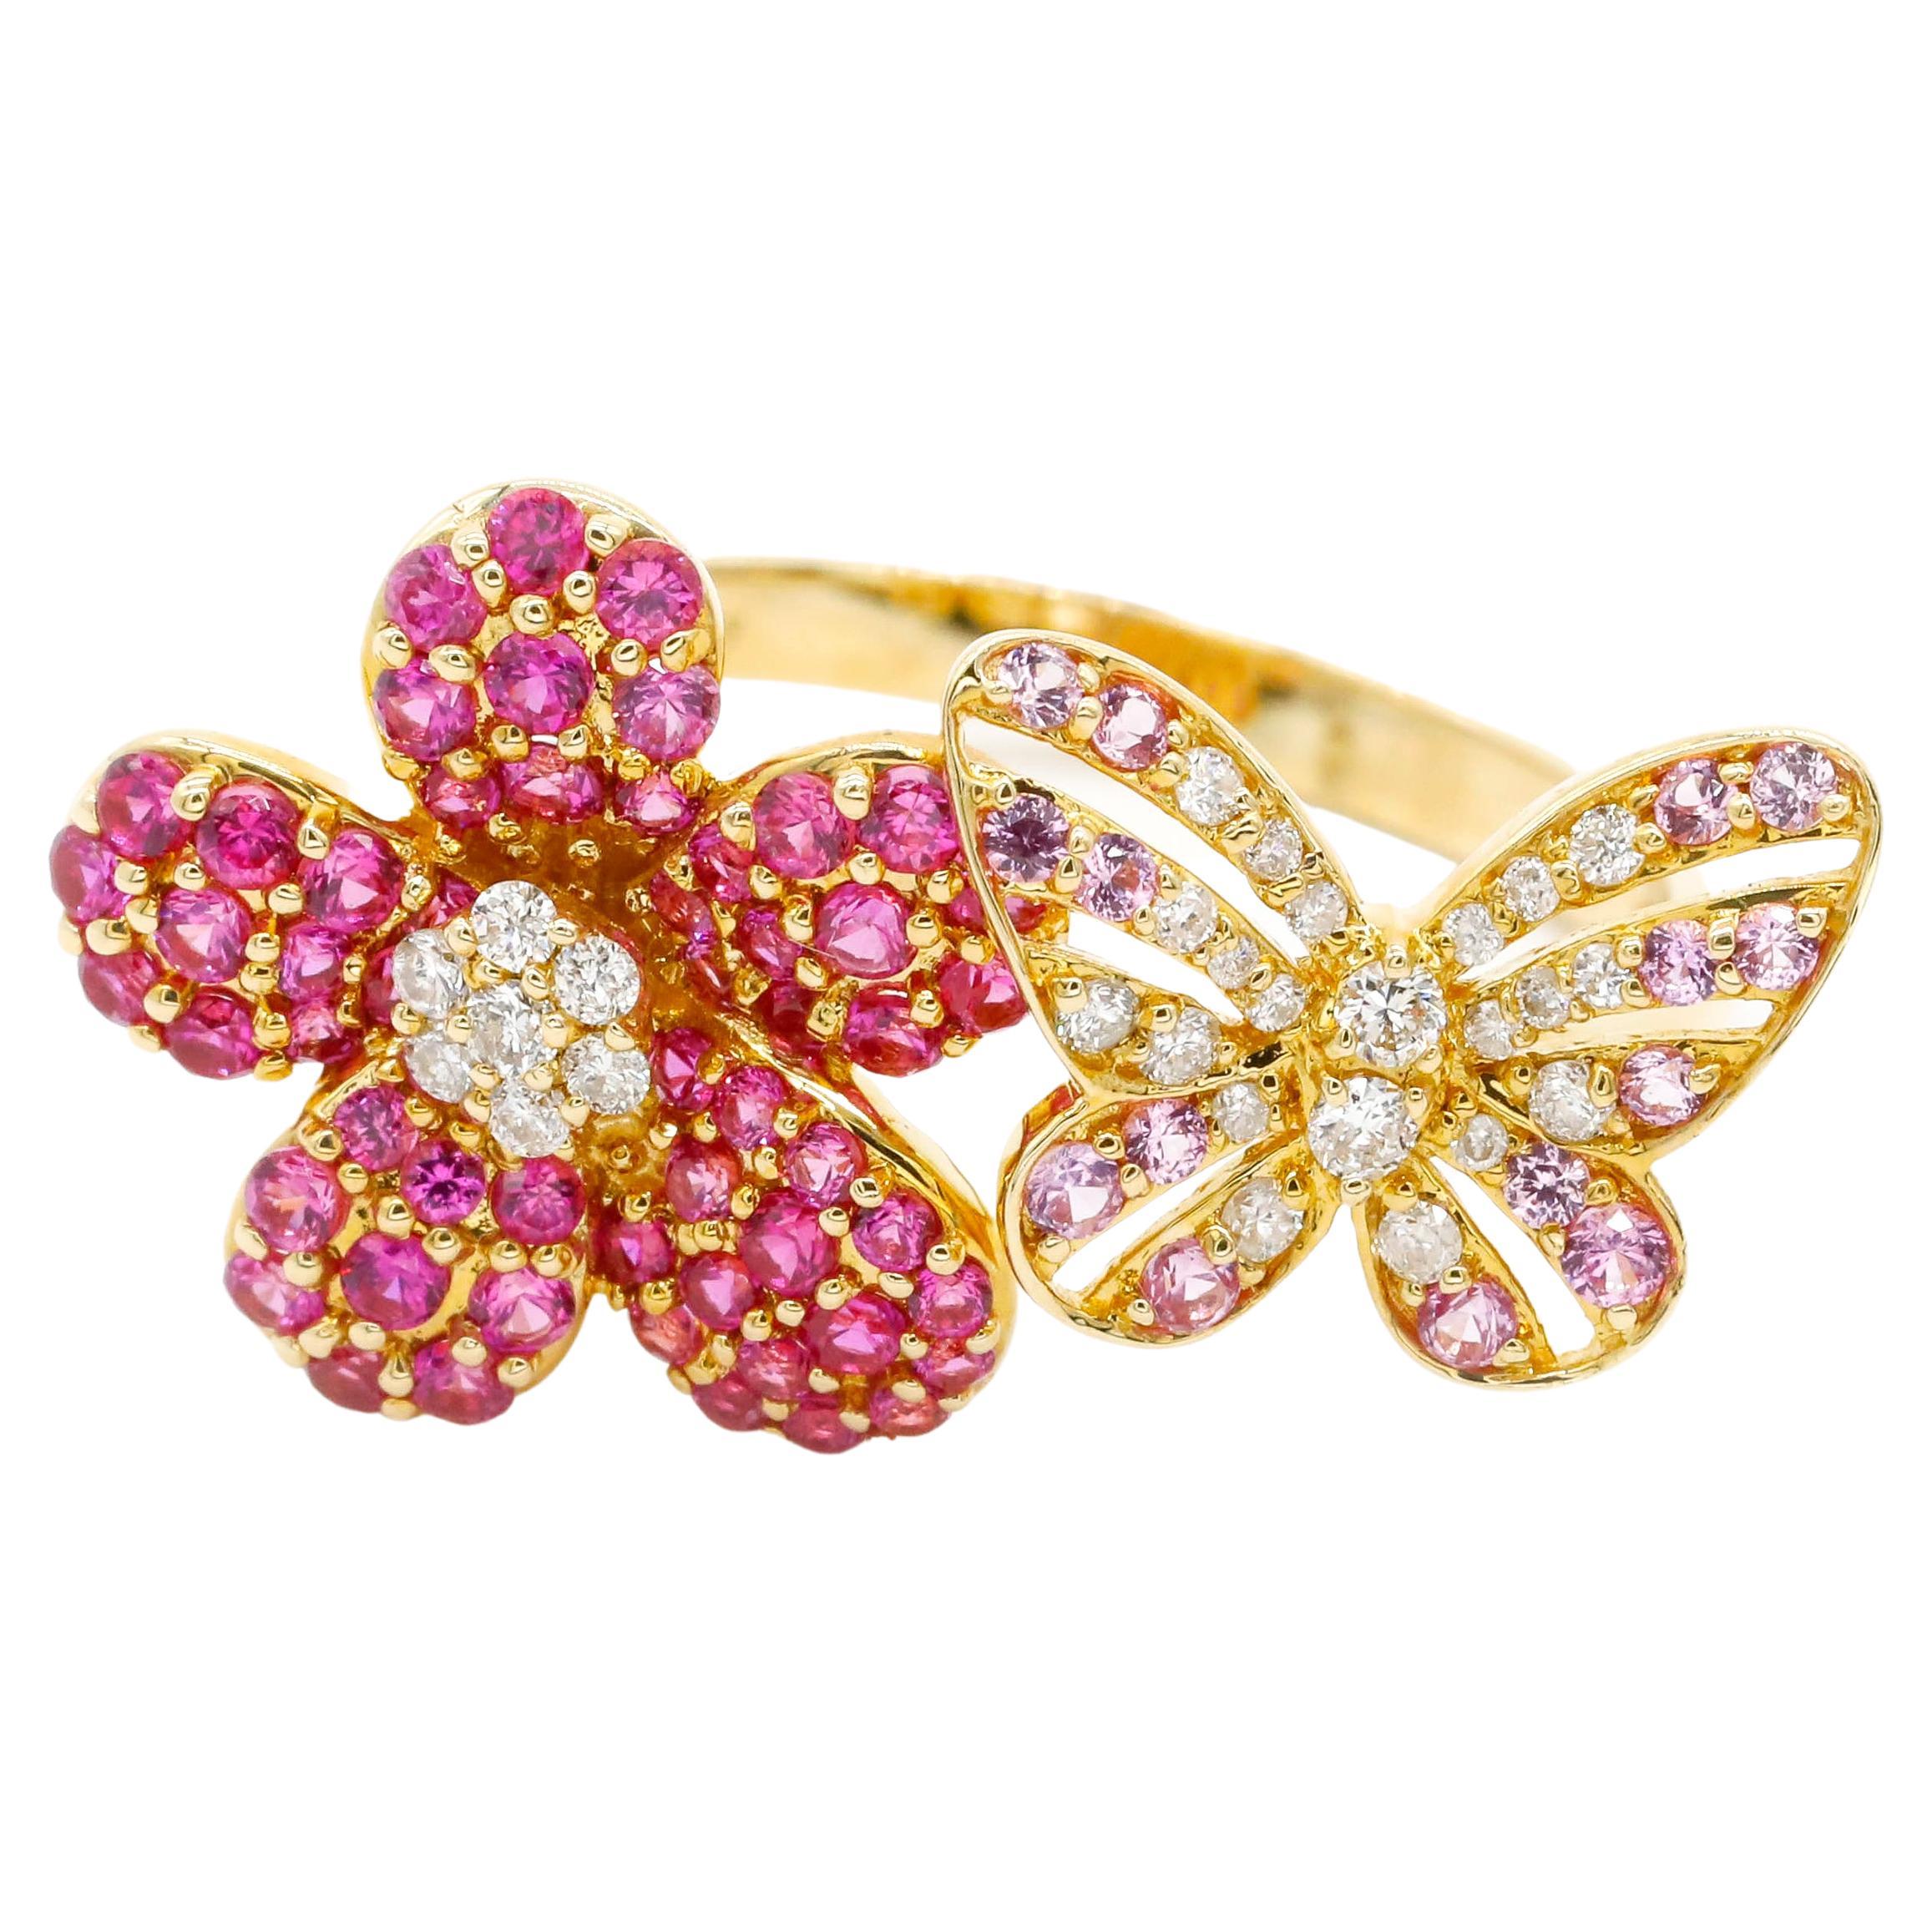 14 Karat Yellow Gold Ring Pink Sapphire and 0.17 Carat Diamond Butterfly Ring

This modern ring features a total of 0.17 carats of diamond round shape and Pink Sapphire Gemstone Set in 14K Yellow Gold.

We guarantee all products sold and our number